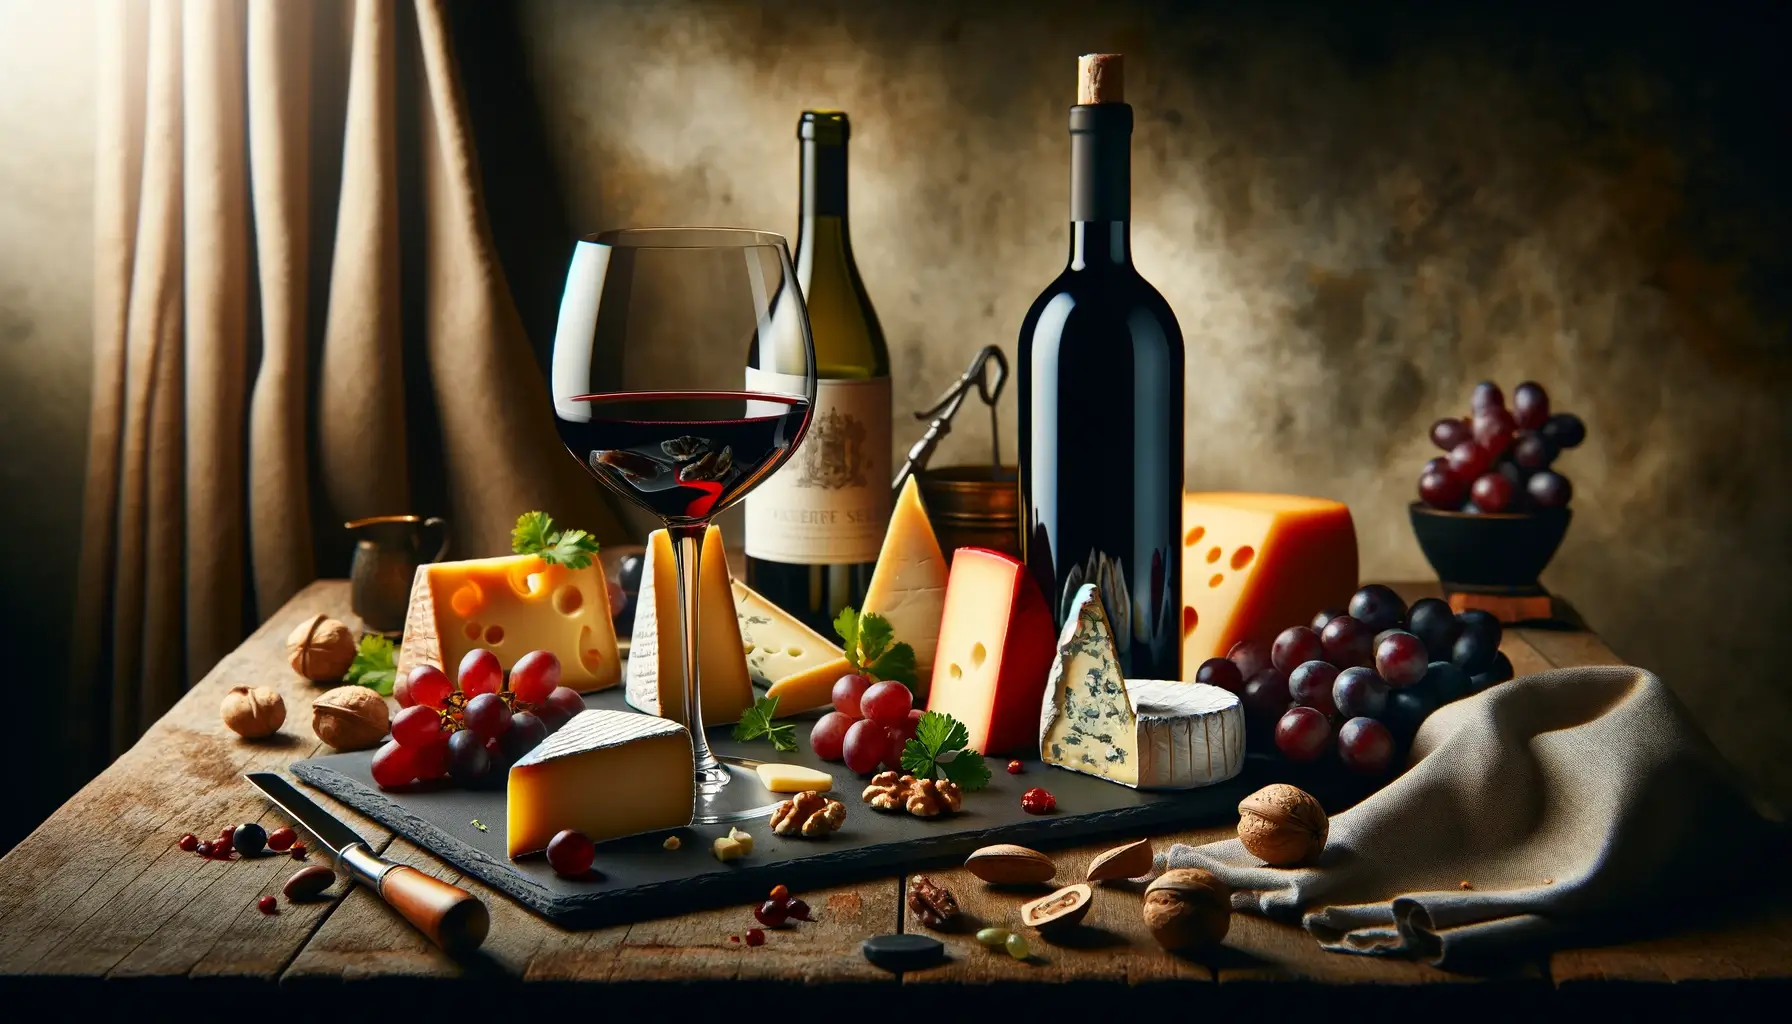 An elegant spread of gourmet cheeses, including Brie, Swiss, and blue cheese, alongside a glass and bottles of red wine, grapes, walnuts, and almonds on a rustic wooden table, bathed in warm, moody lighting.